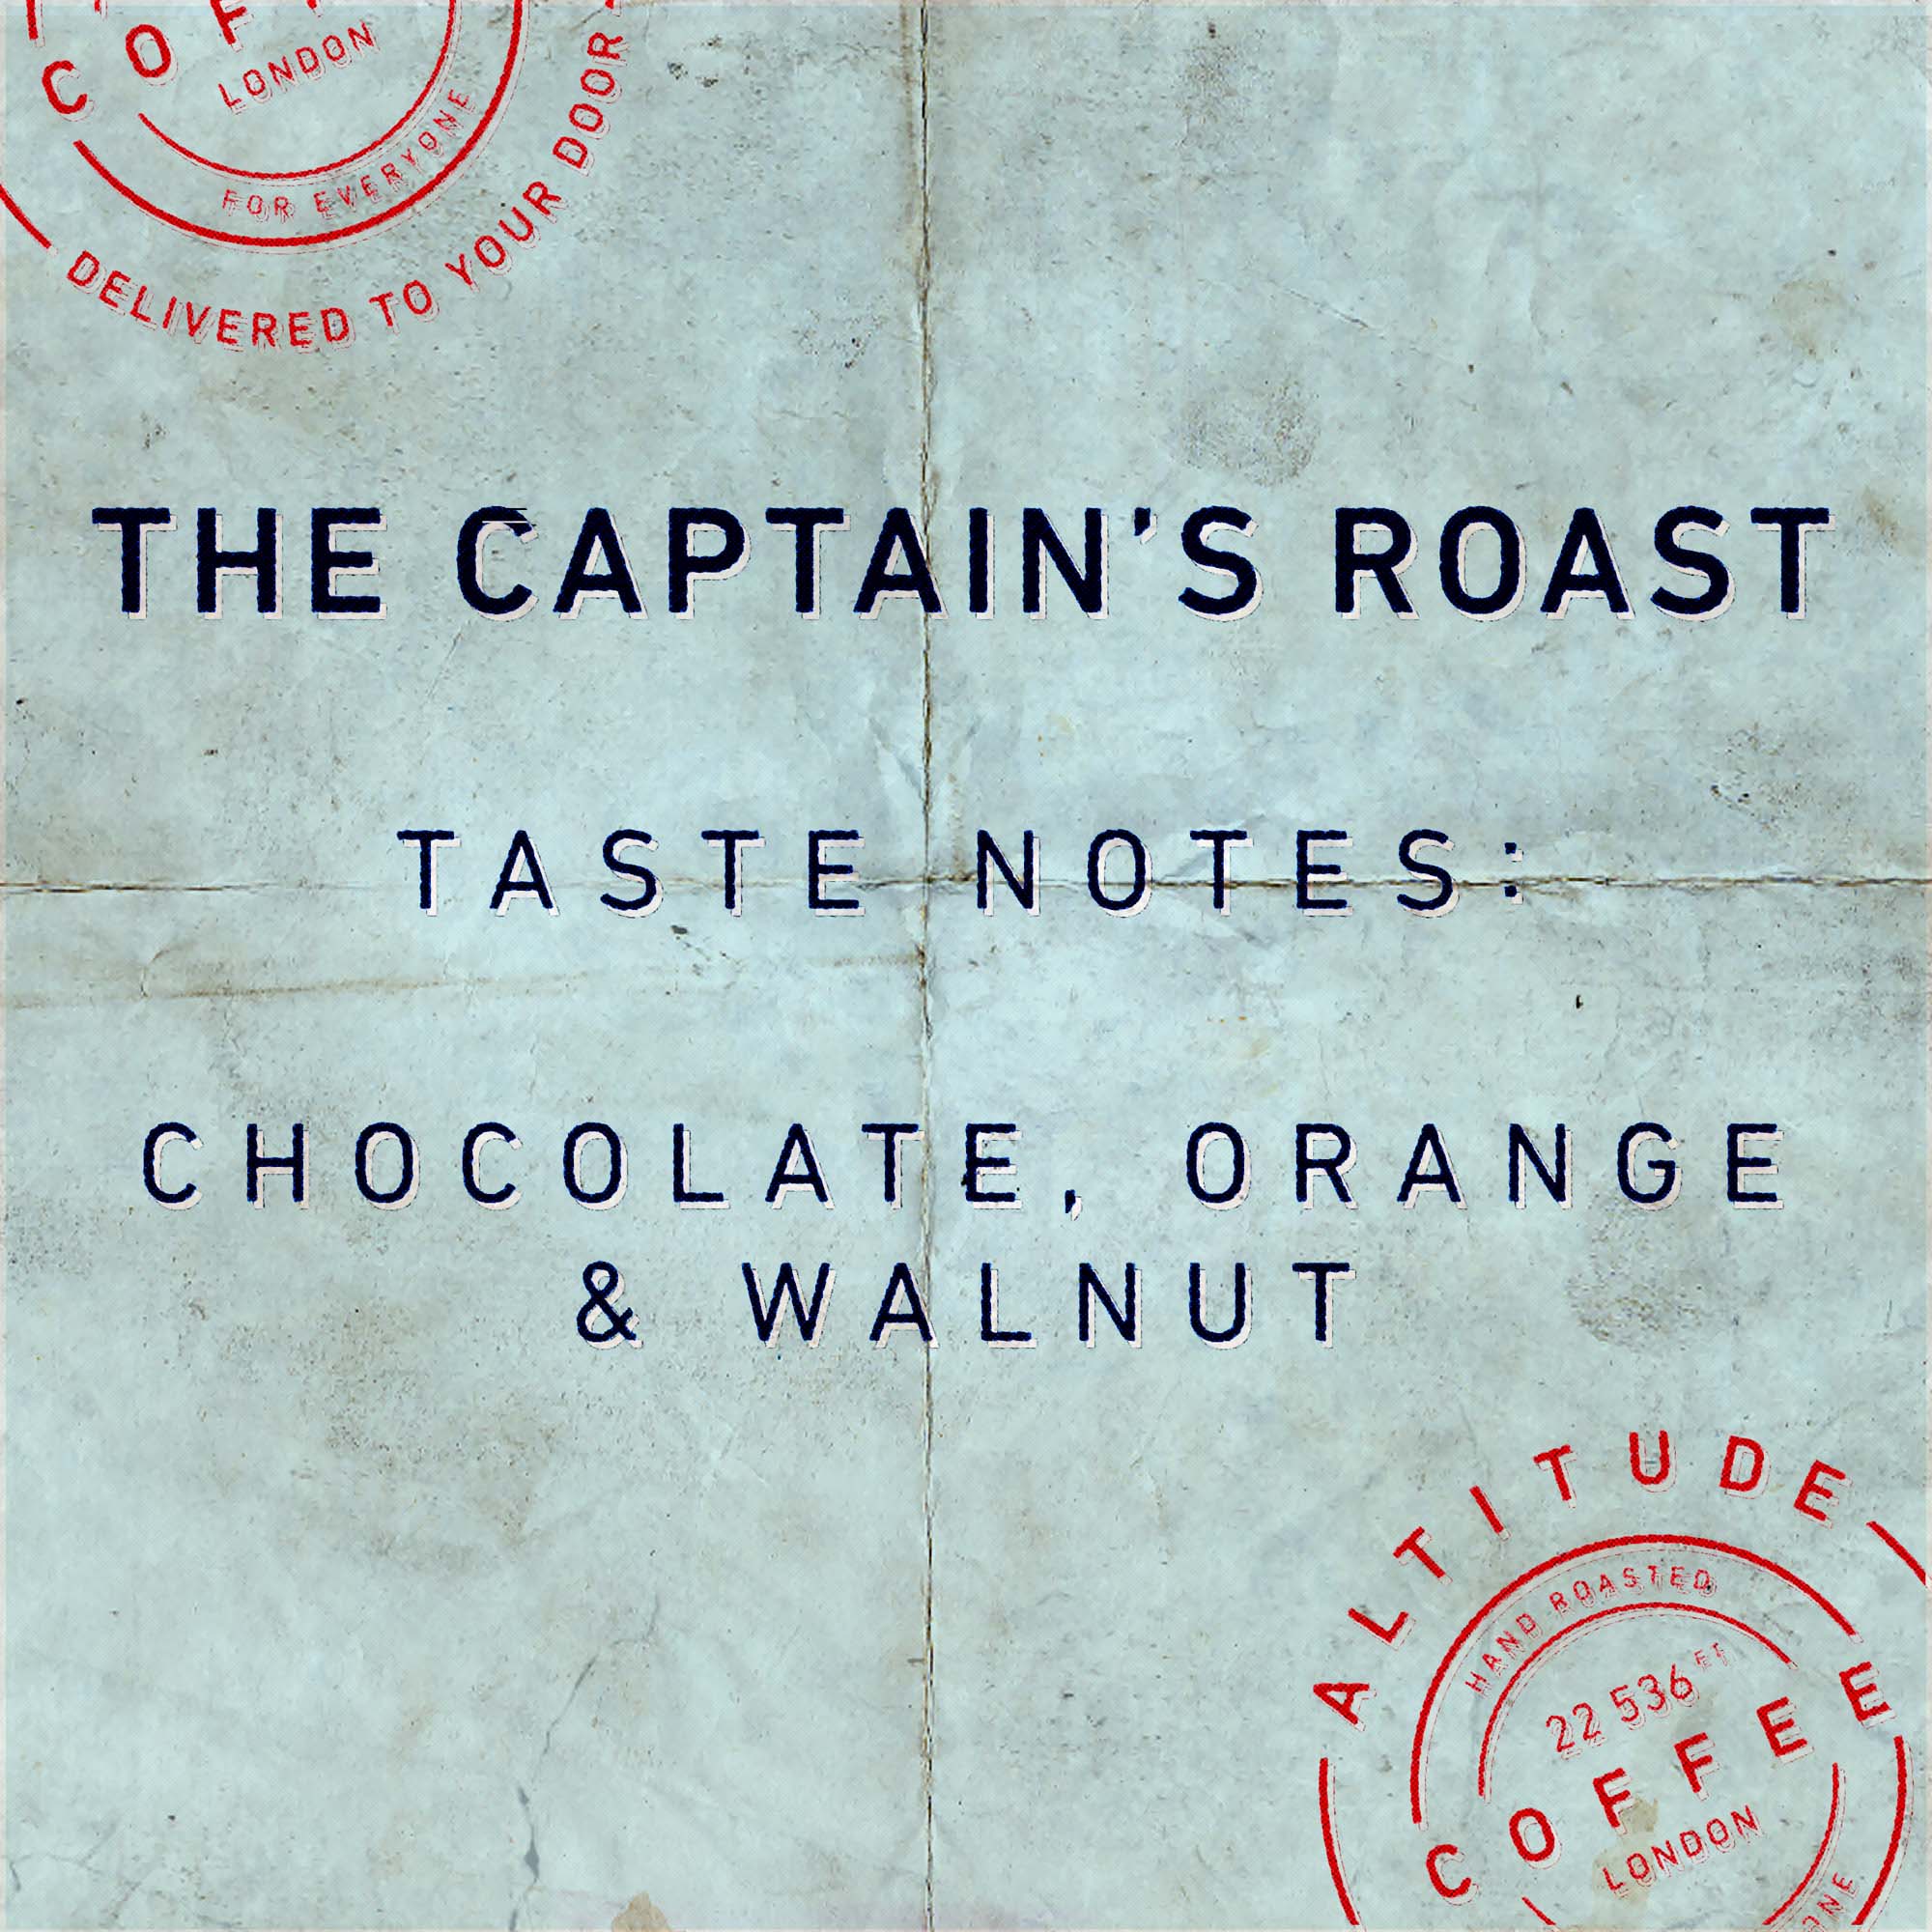 The Captain's Roast Espresso Blend. Specialty coffee blend